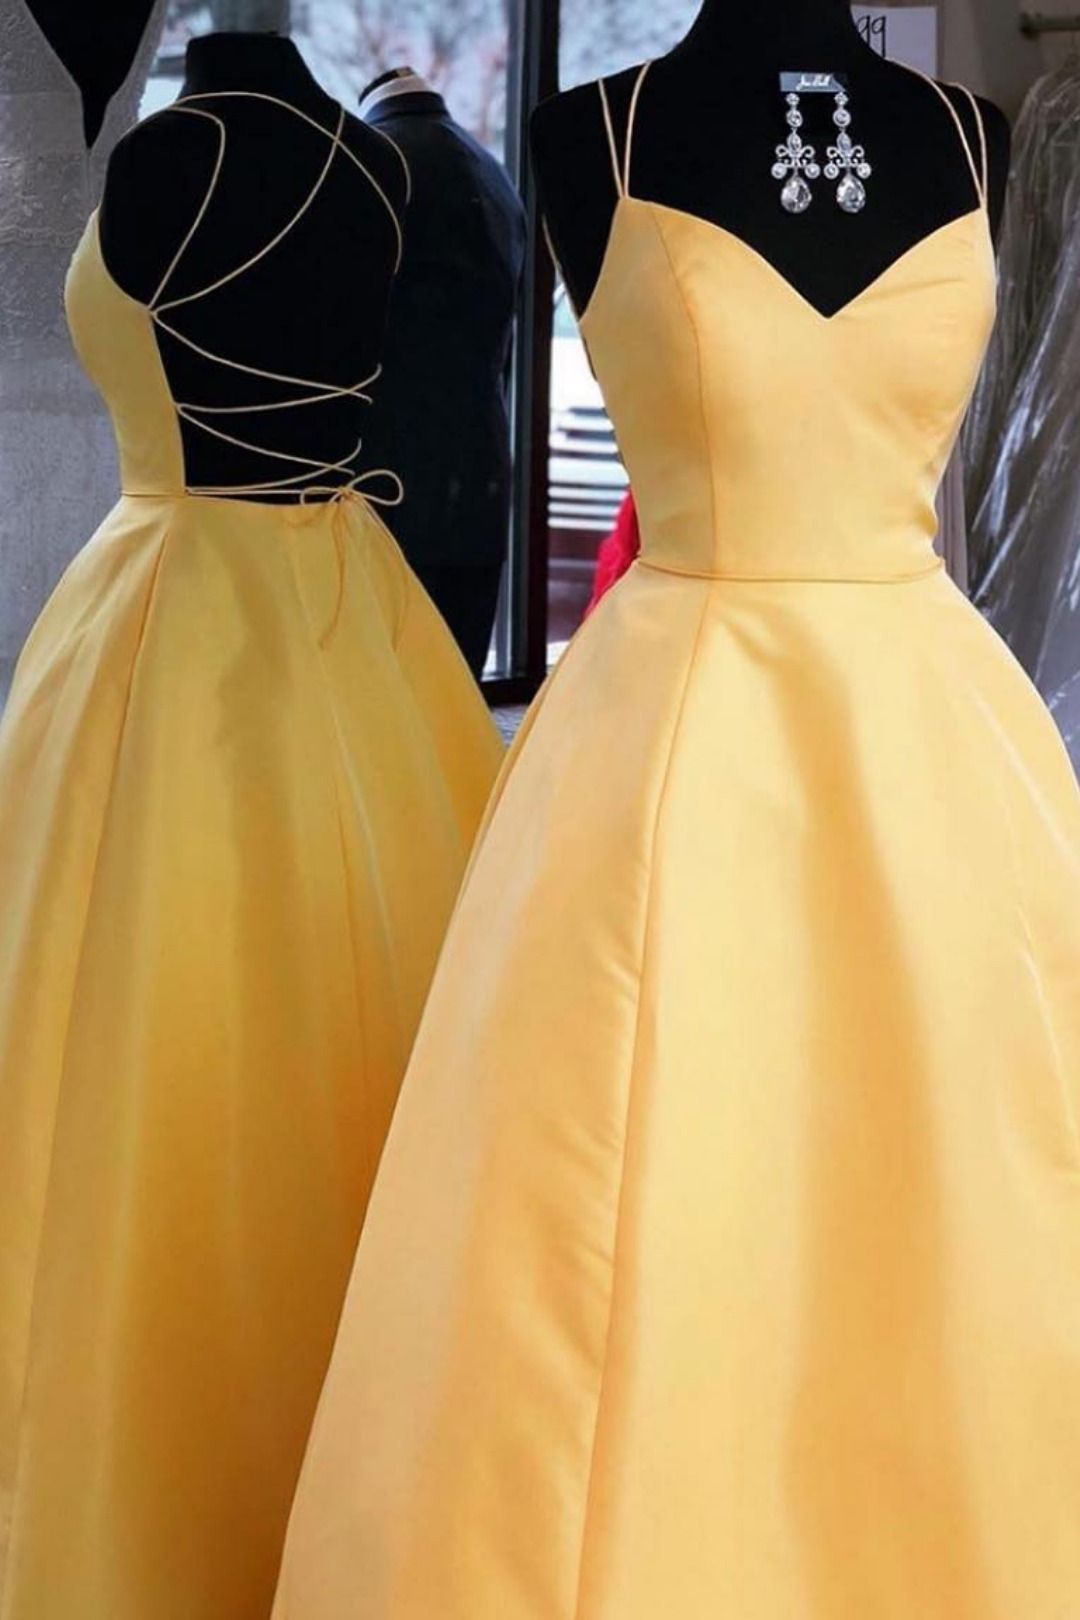 Spaghetti Straps A-line Homecoming Dresses,yellow Floor Length Satin Homecoming Dresses,charming Open Back Evening Dresses.ph807